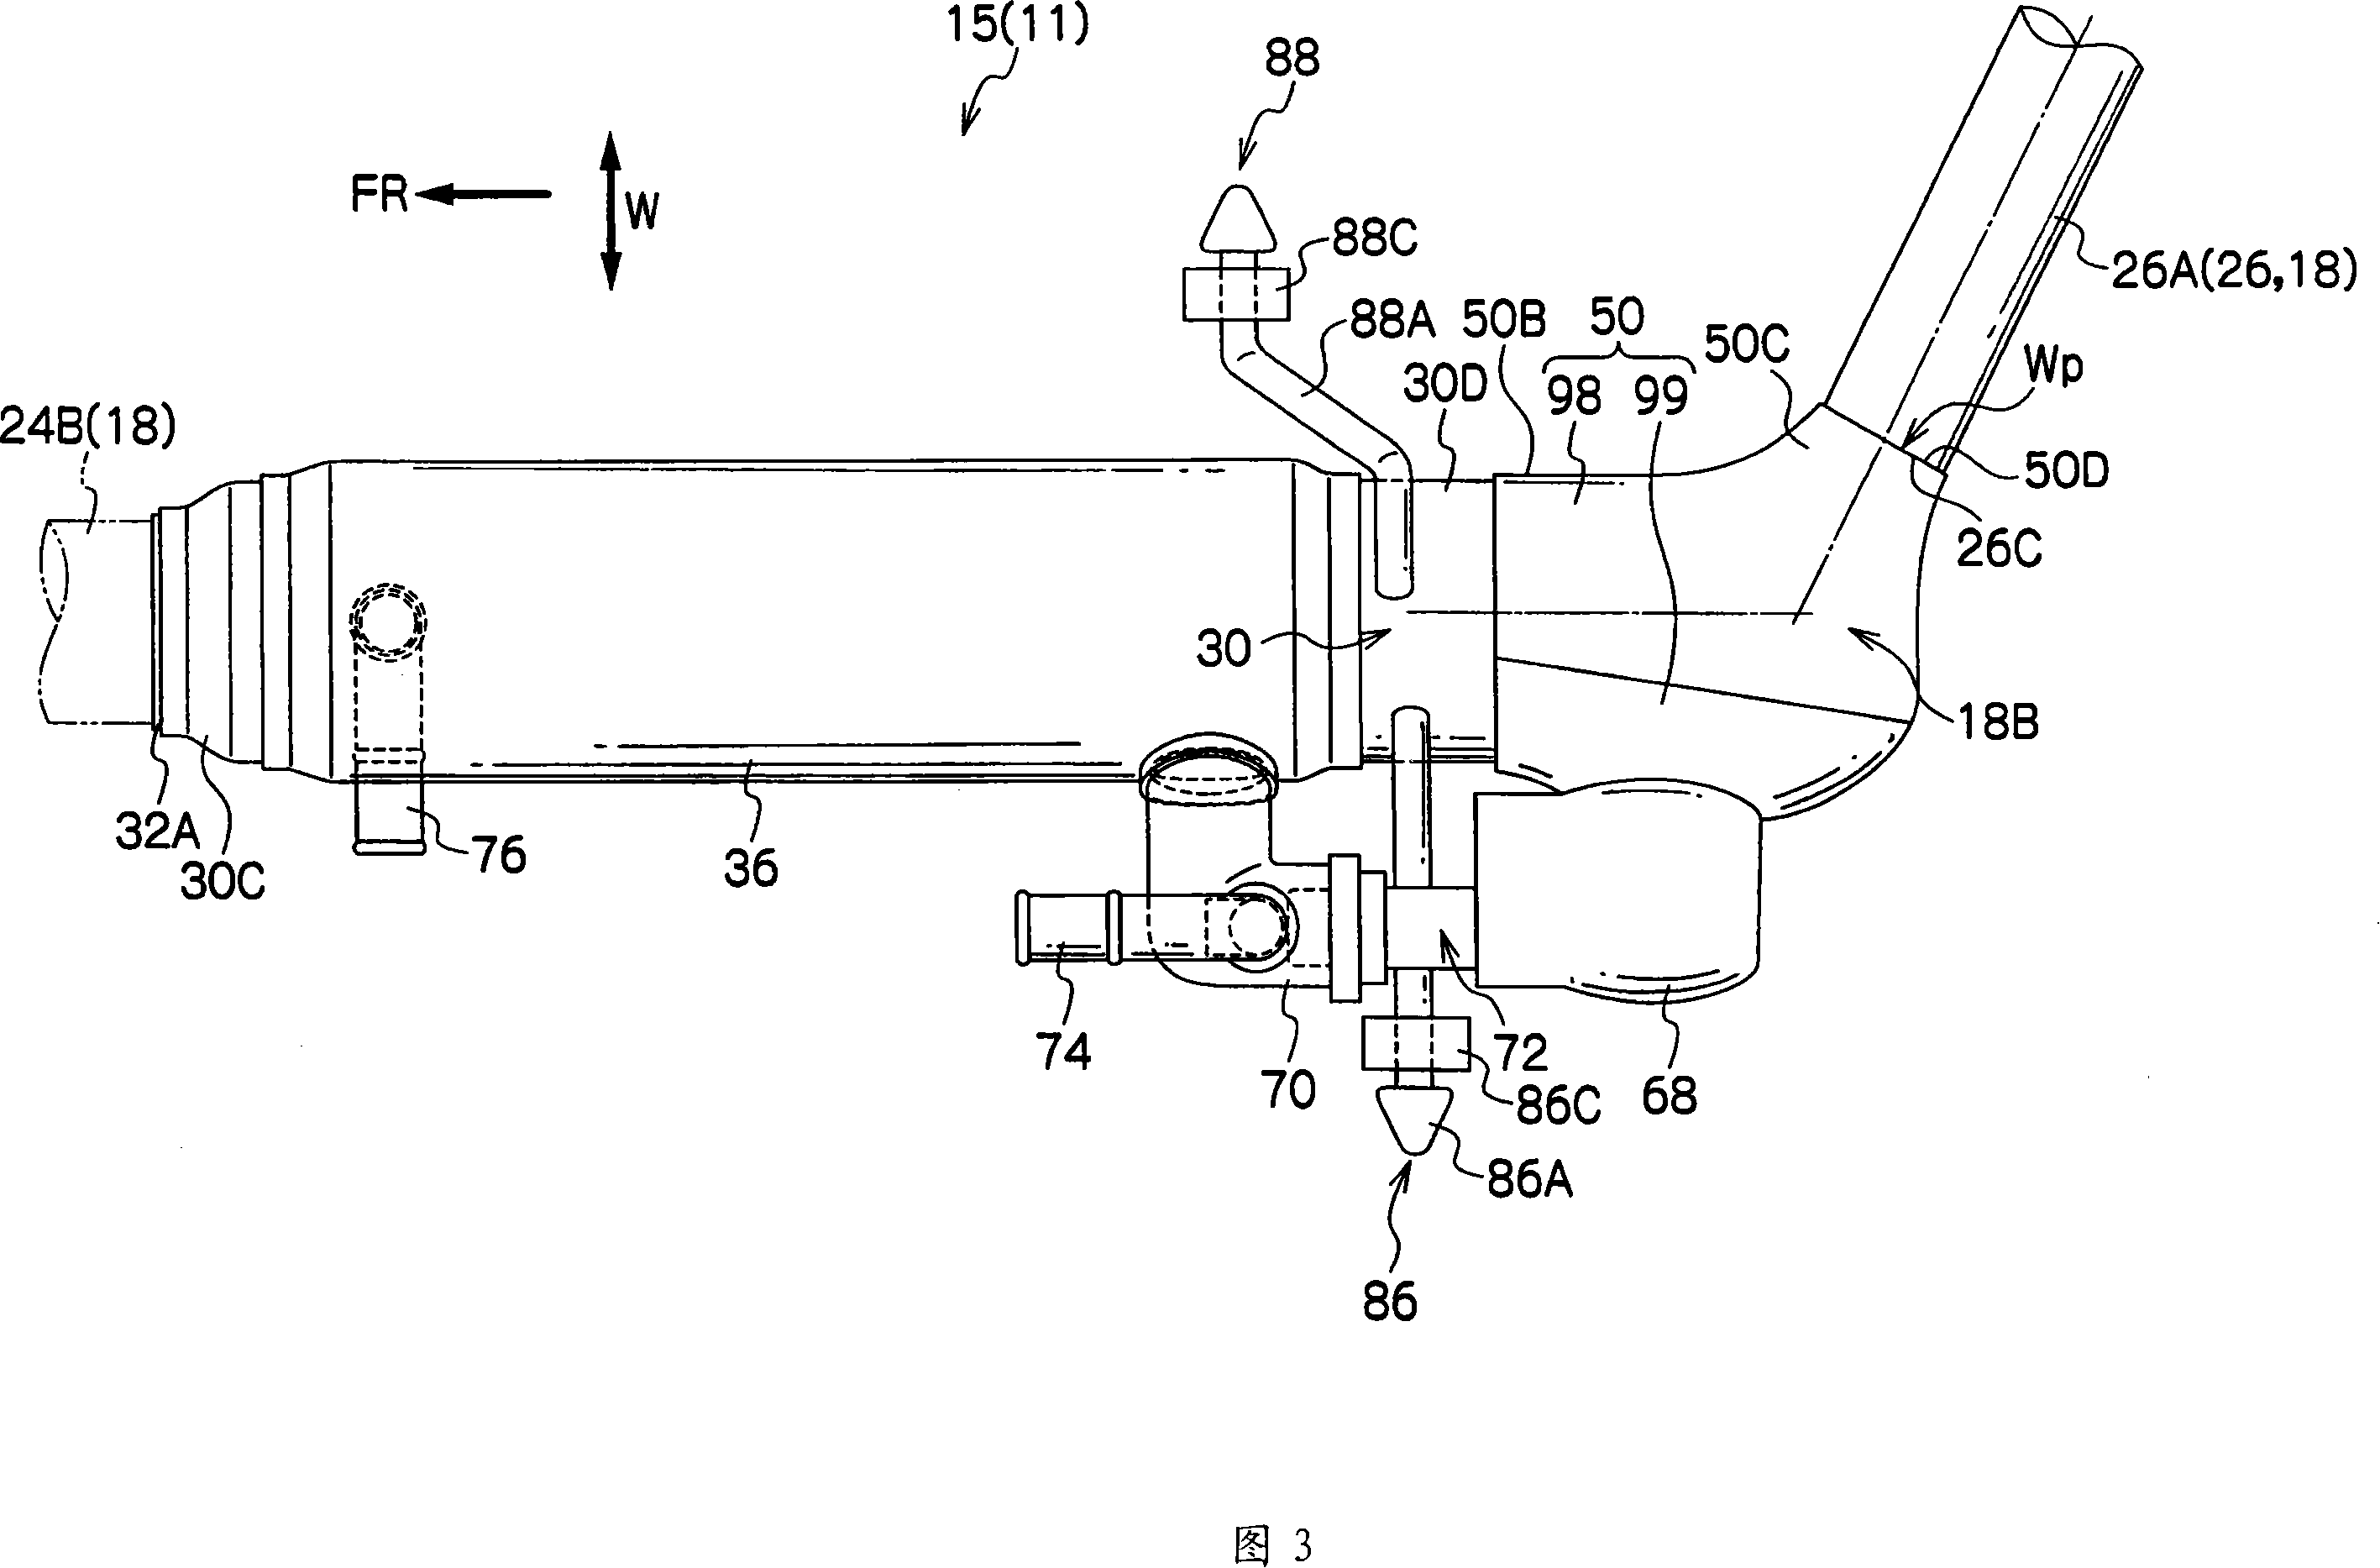 Vehicle exhaust system structure